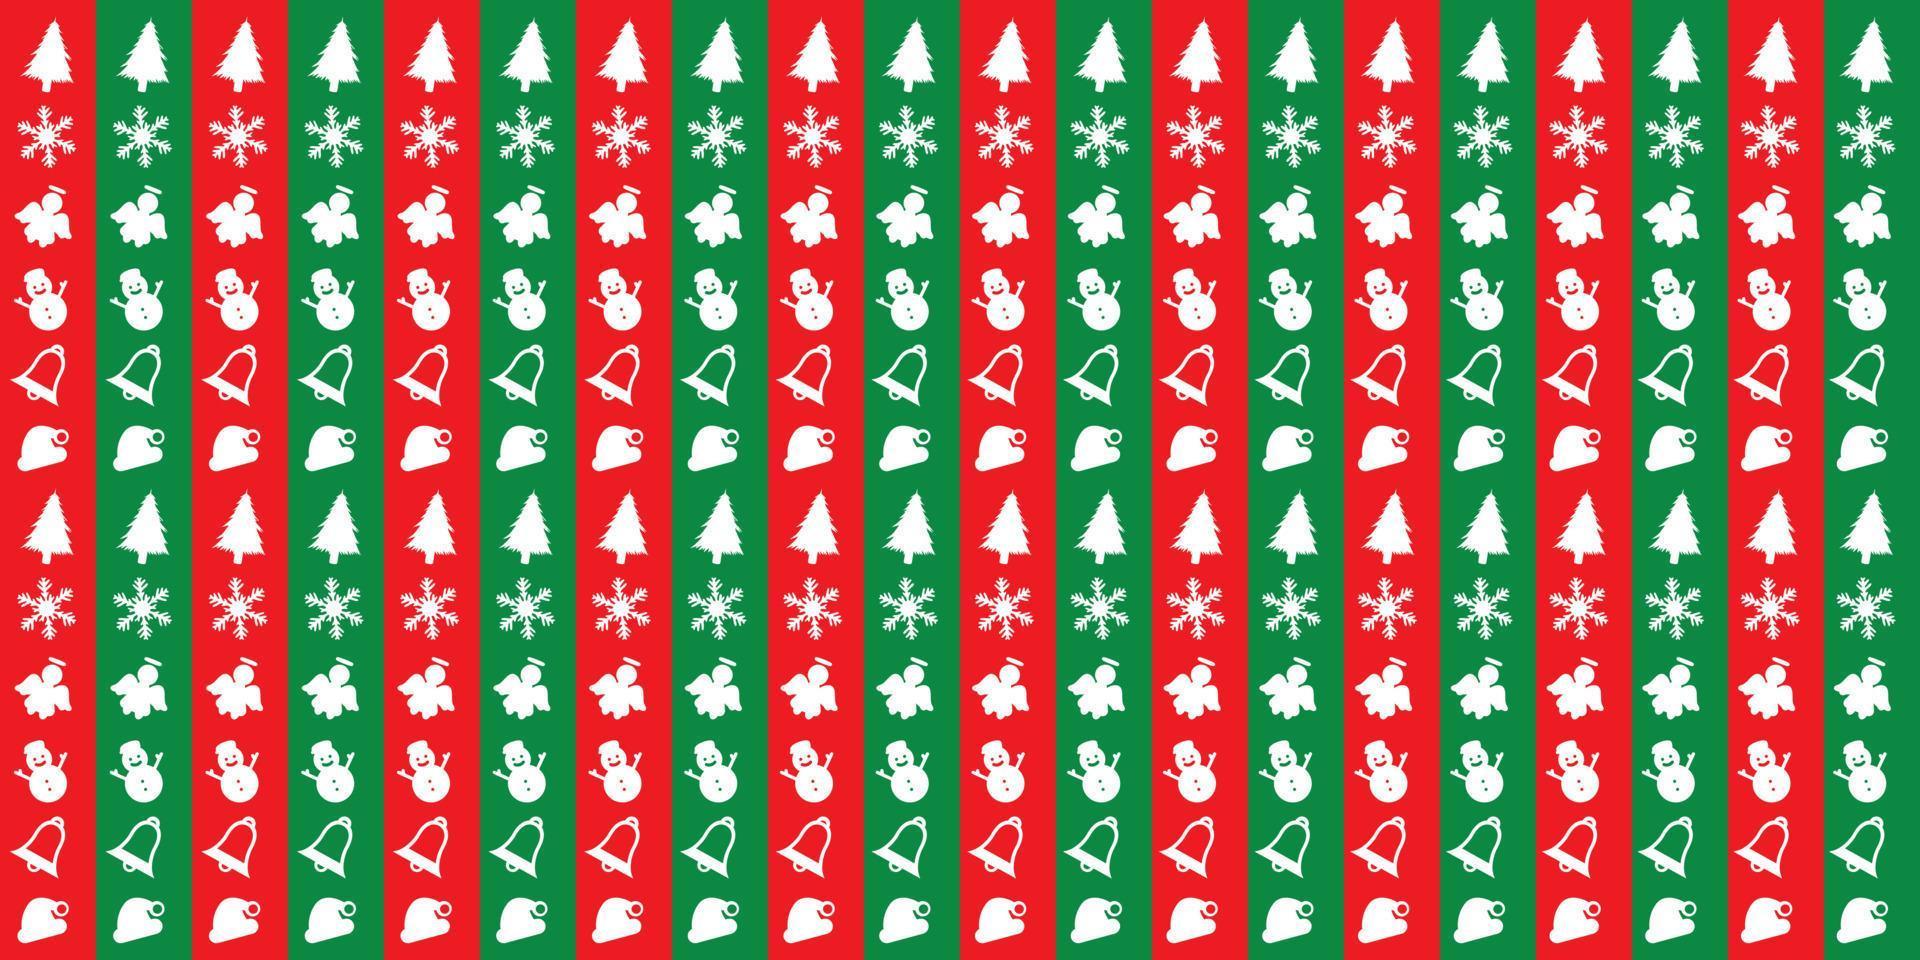 Christmas Decoration objects pattern background vector illustration